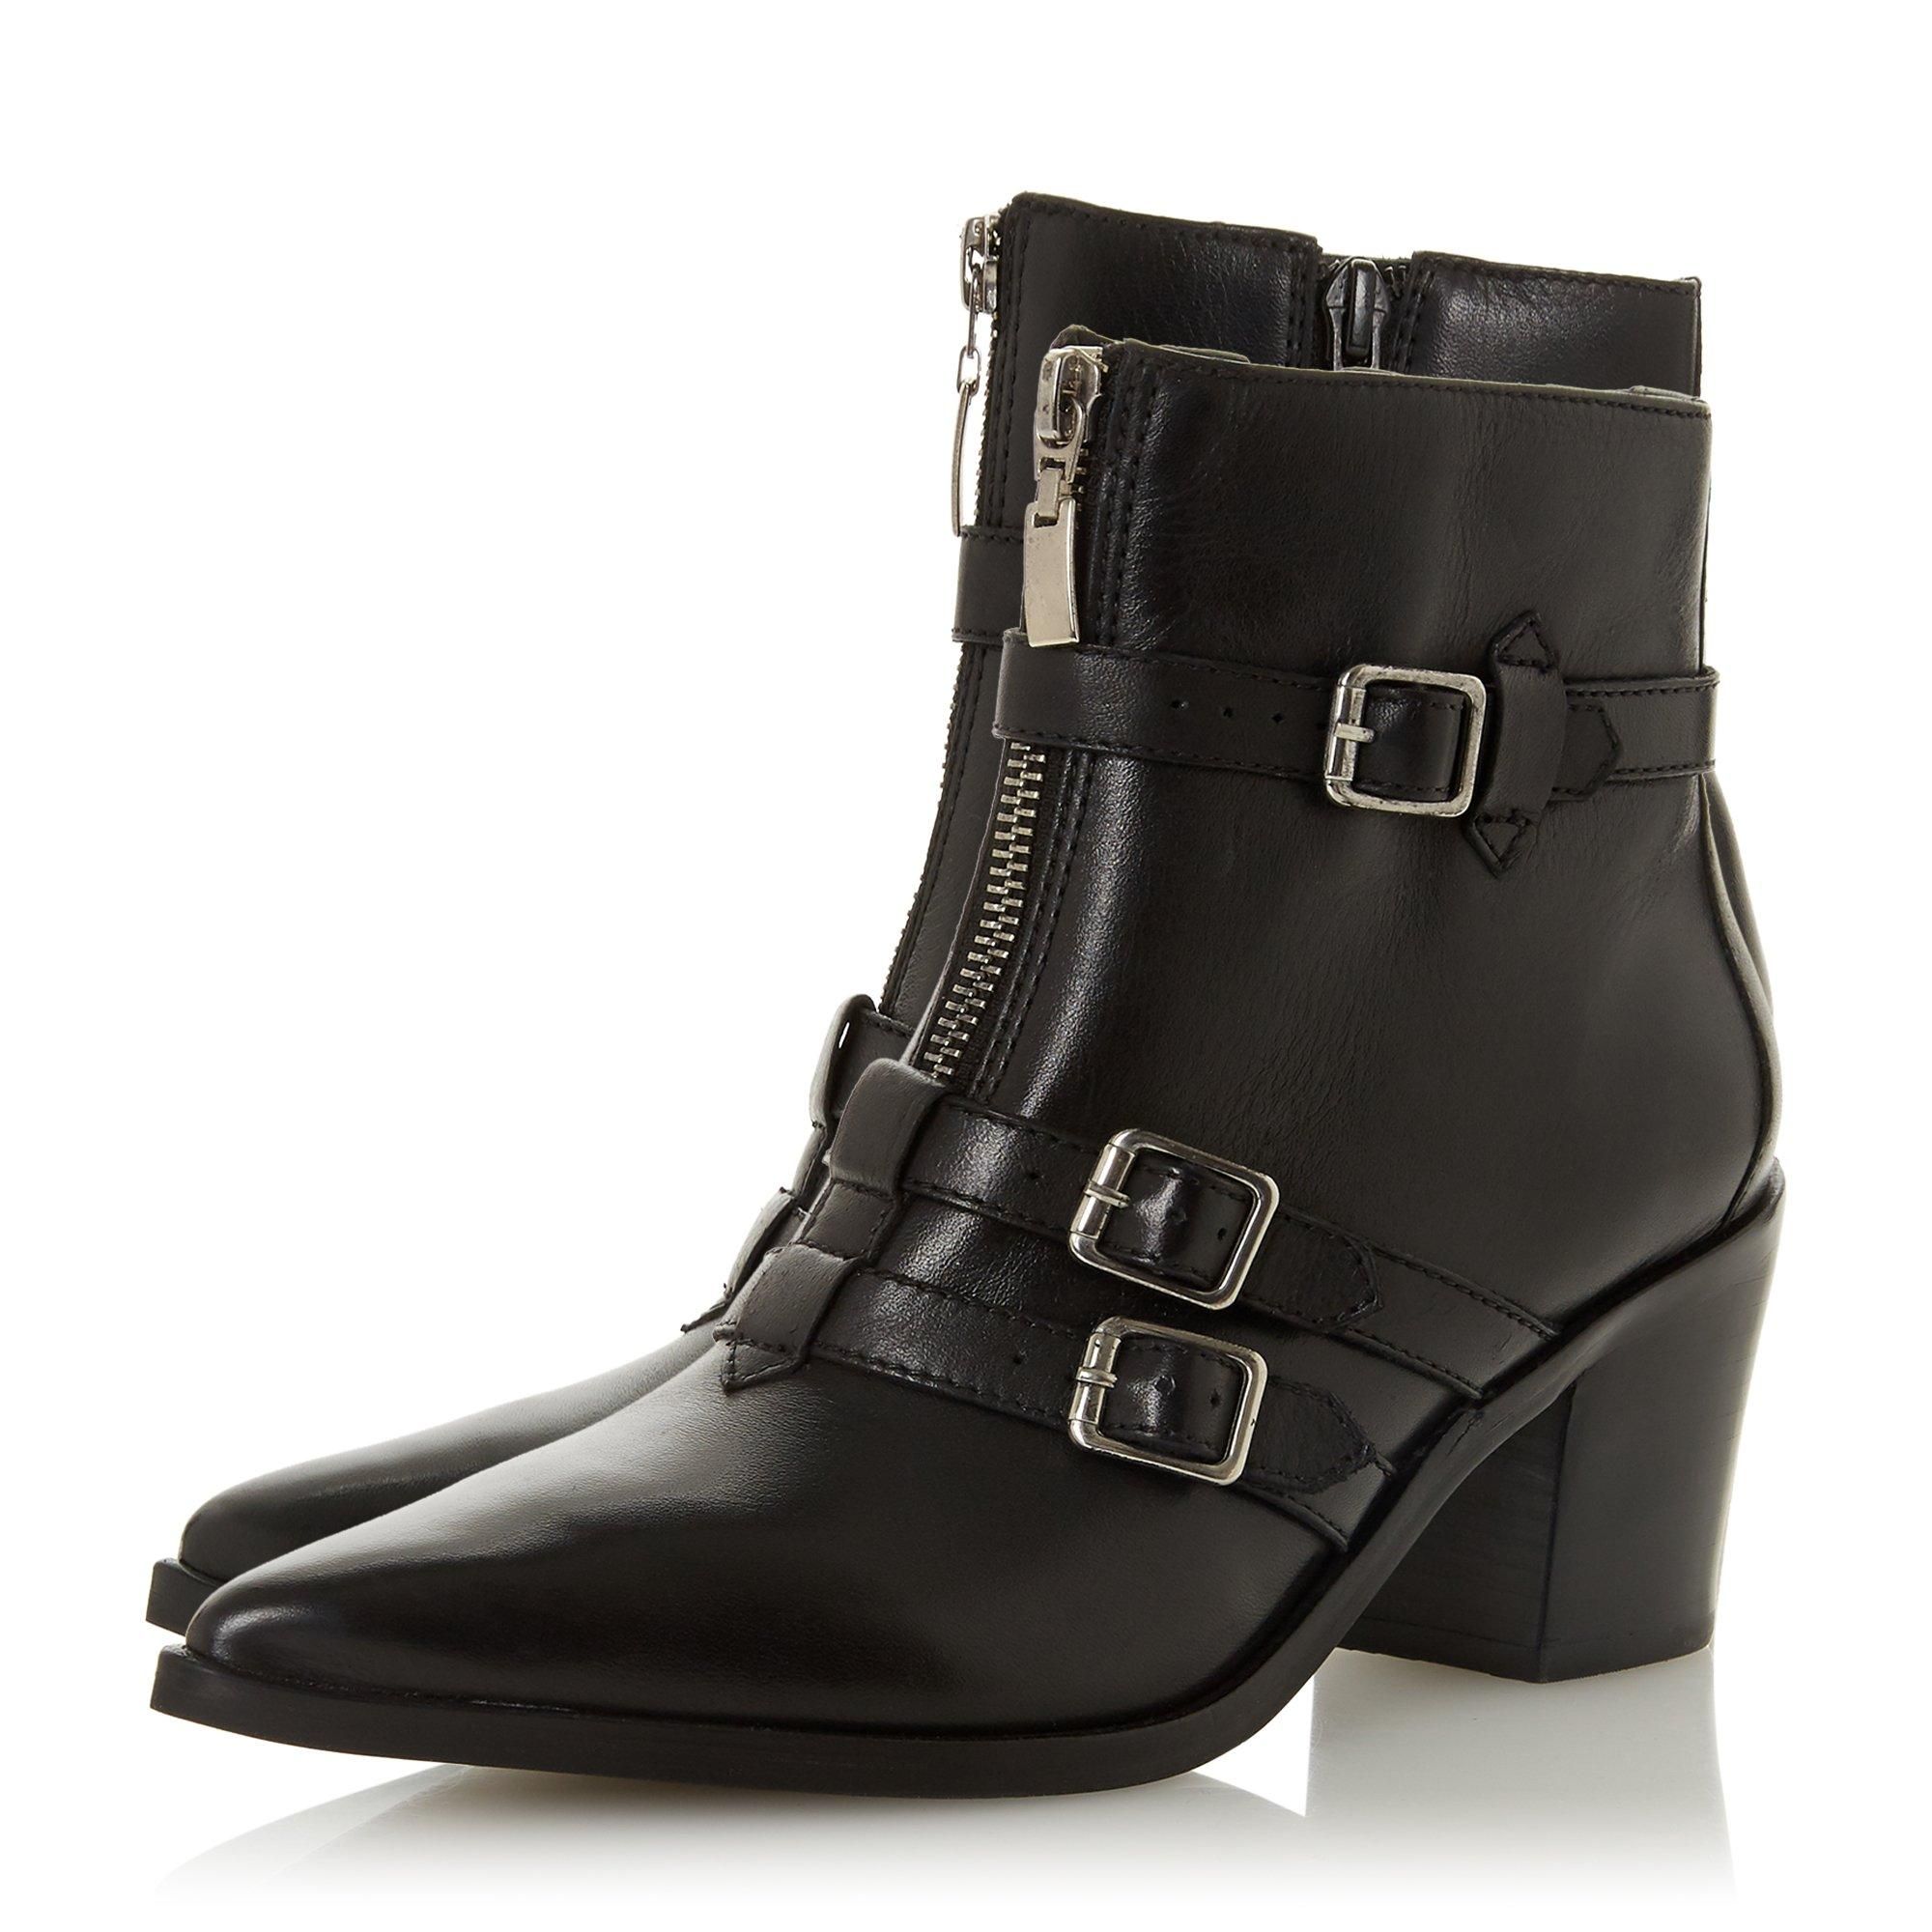 Opt for a contemporary style with the Princely ankle boot from Dune. It features a front zip fastening and a sleek pointed toe. Complete with a gold-tone triple buckle strap.